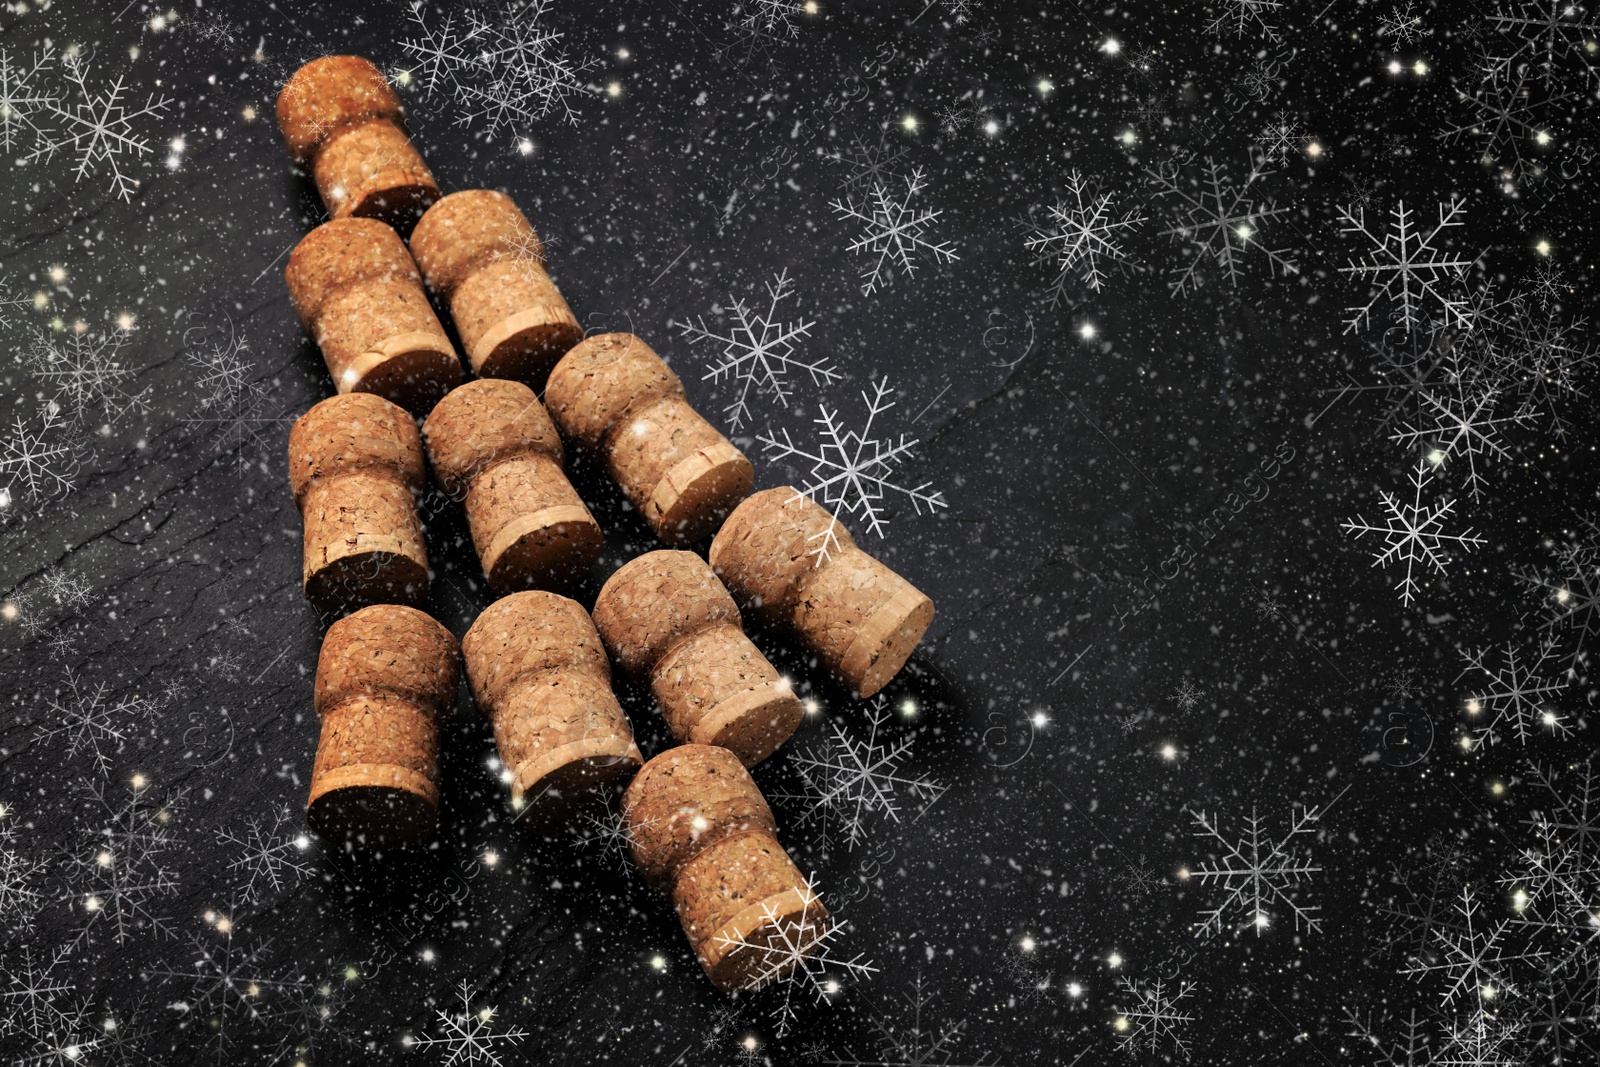 Image of Christmas tree made of sparkling wine corks on black background